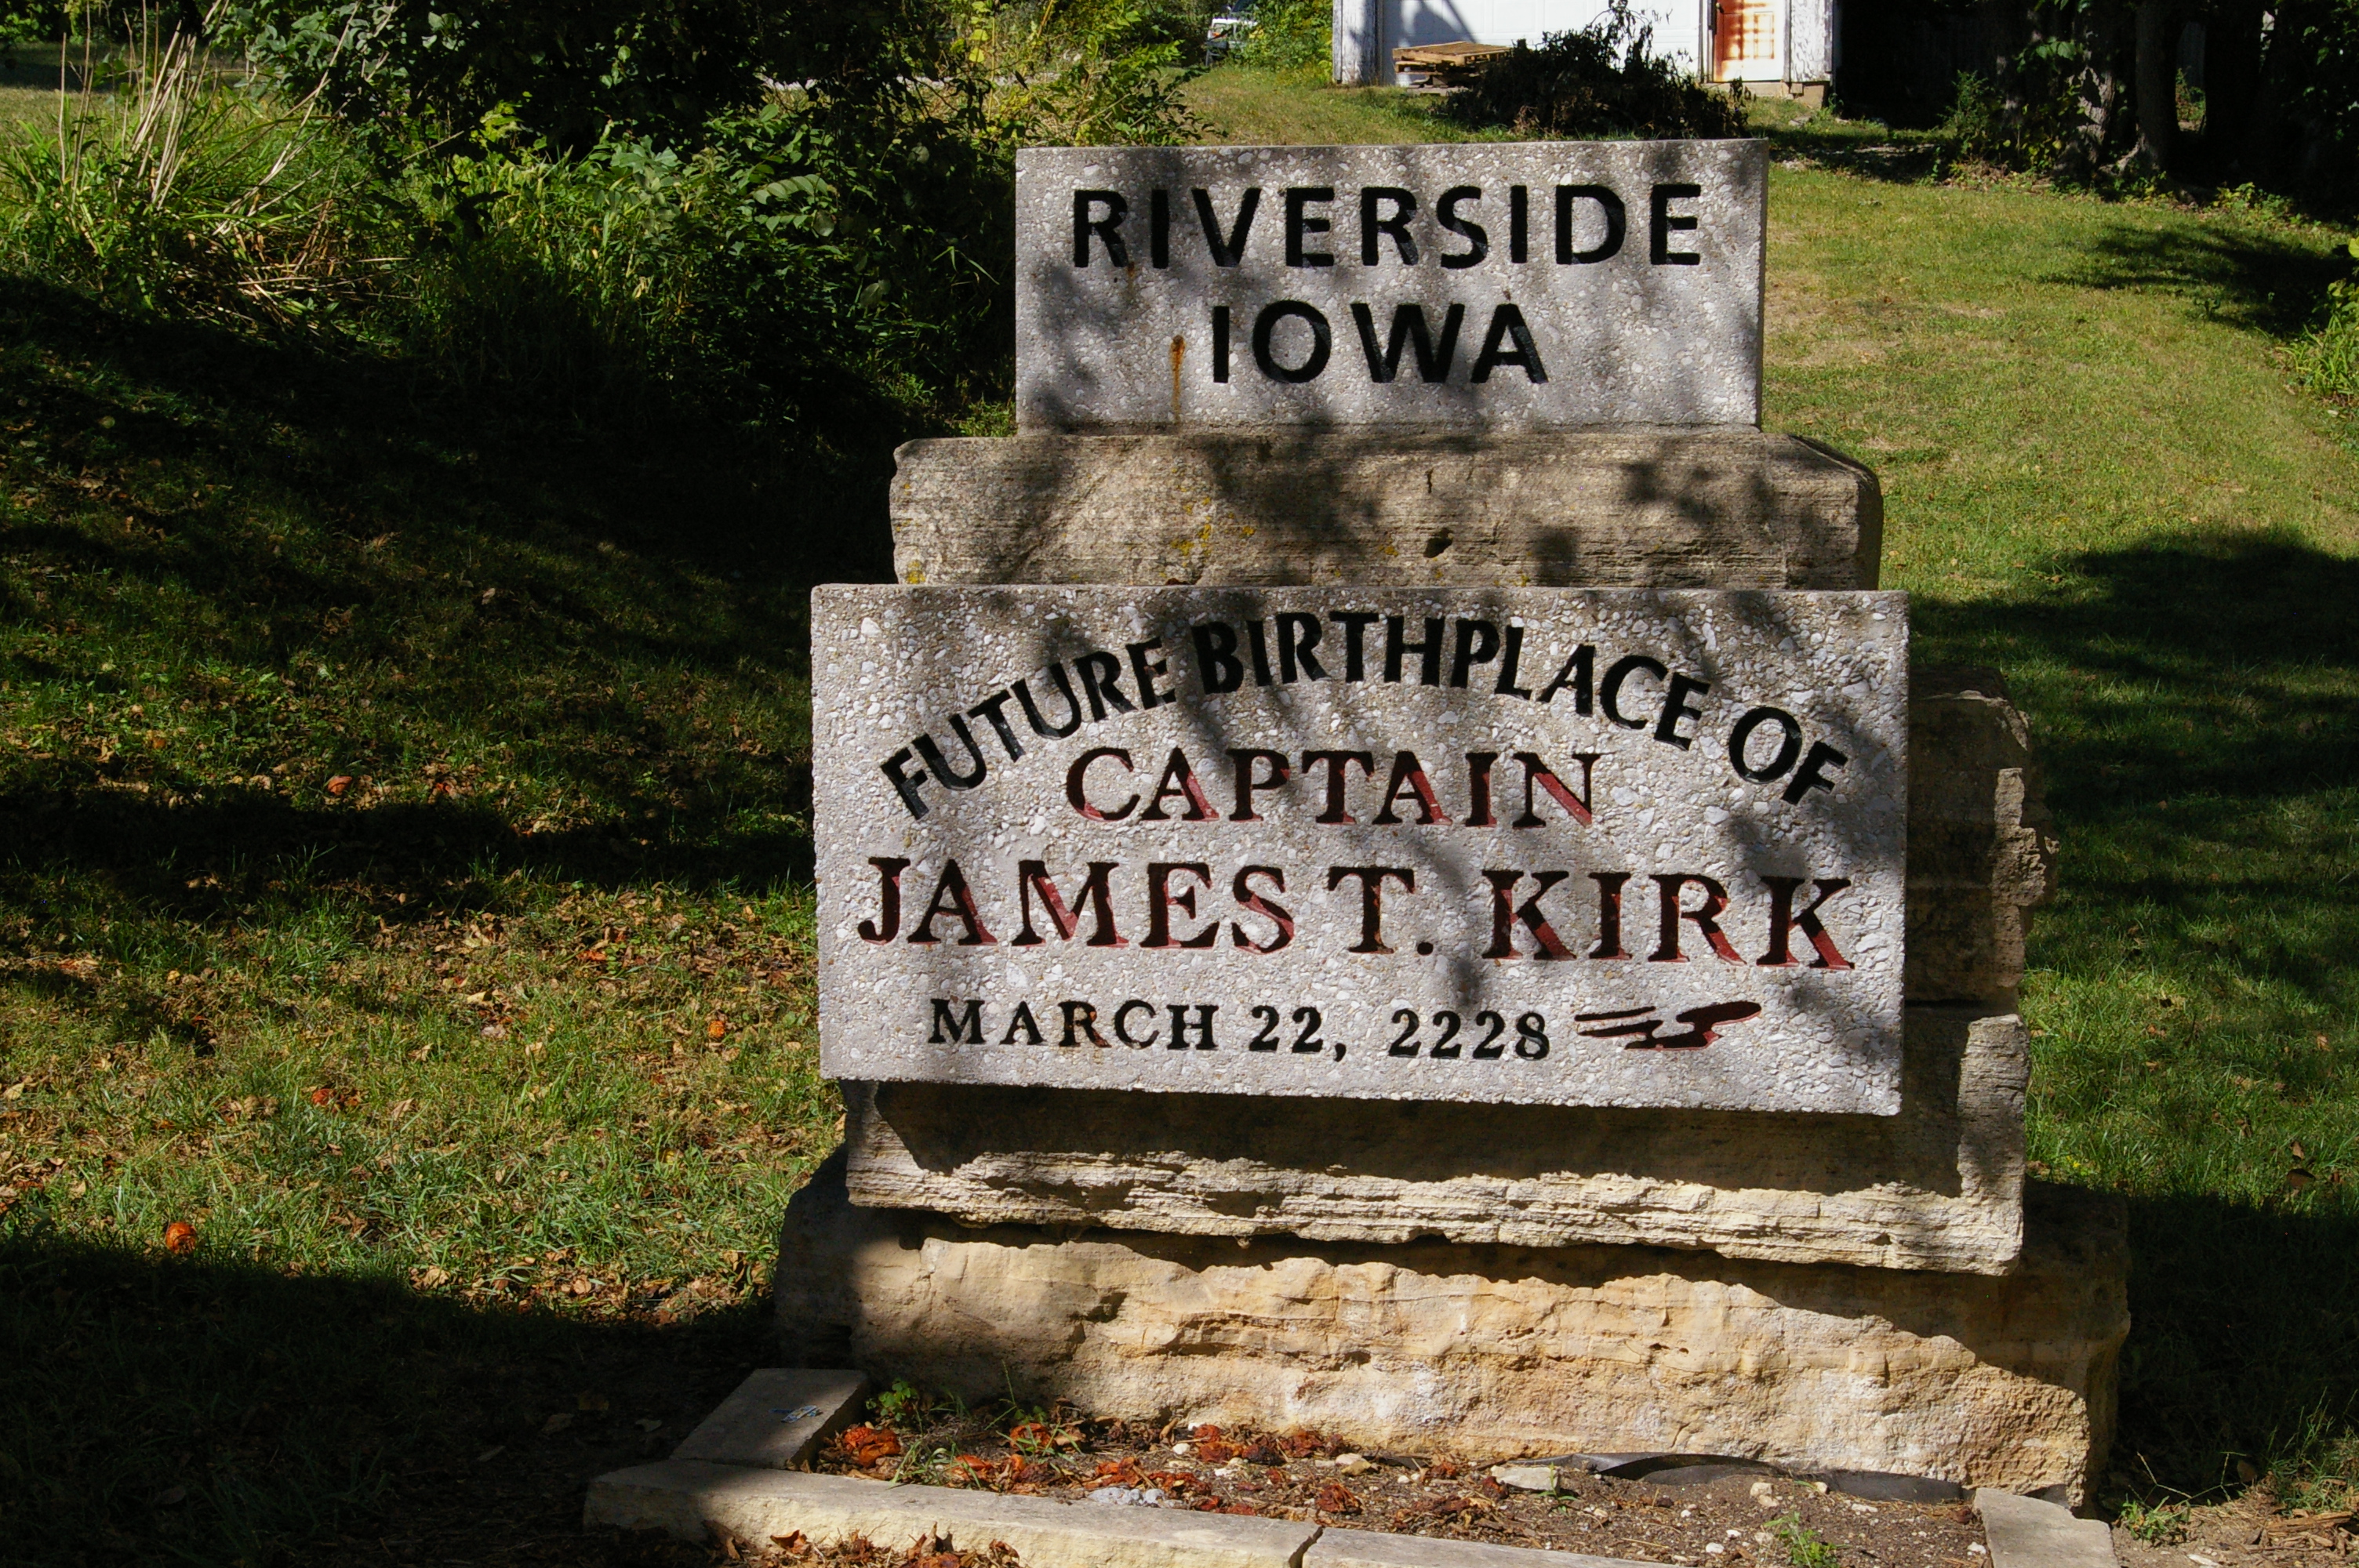 Historic marker for the Future Birthplace of Captain James T. Kirk in Riverside, Iowa